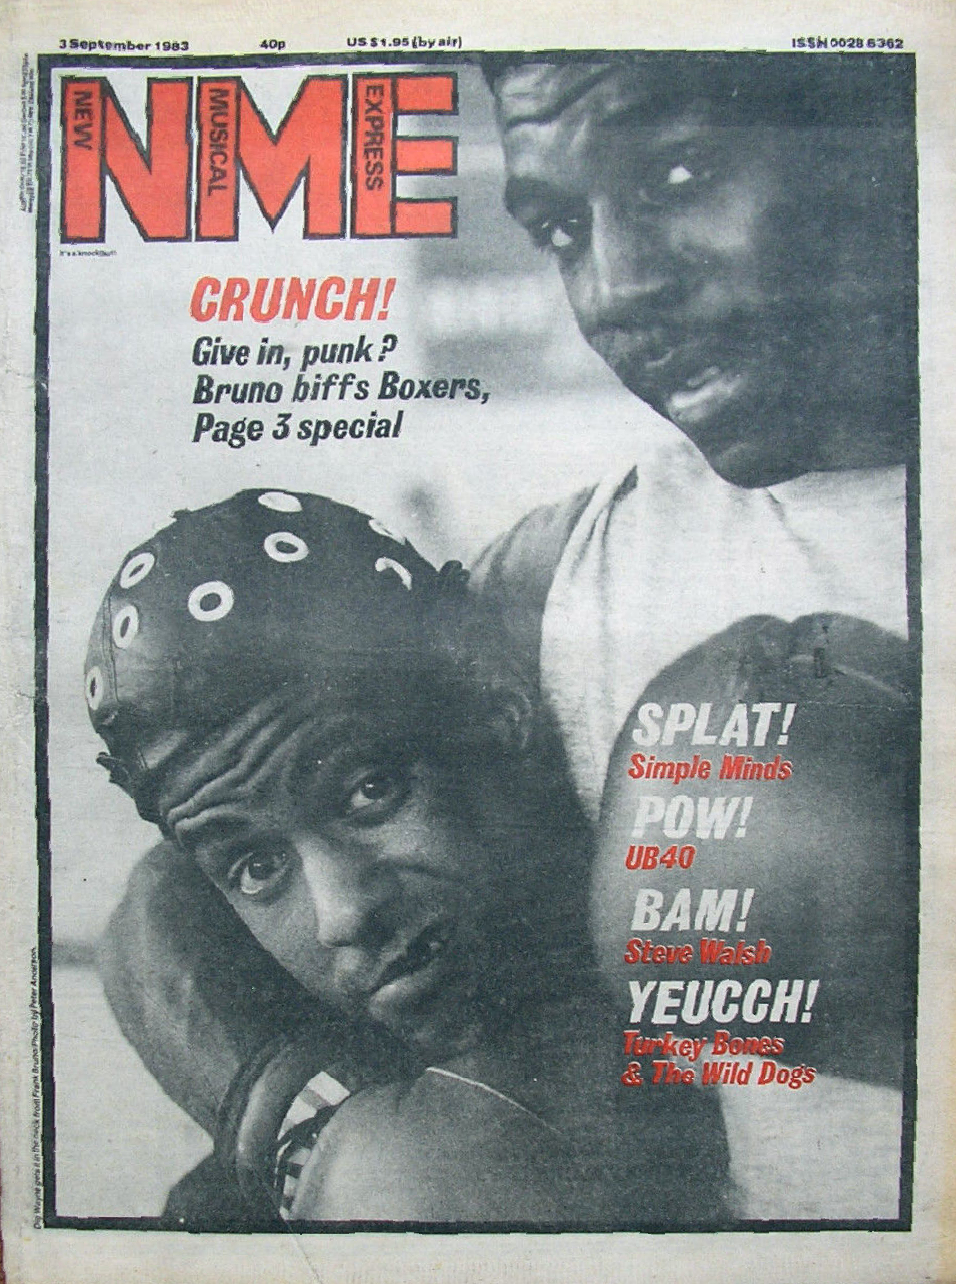 NME - 3rd September 1983 - 44 pages.Simple Minds - 2 page interview/photos.UB40 - 1 & 1/2 page interview/photo.Turkey Bones & The Wild Dogs - Interview/photo.Steve Walsh - Interview/photo.Impossible Dreamers - 1/2 page interview/photo.JoBoxers/Frank Bruno - 1/2 page interview/photos.Notting Hill Carnival - Review/photos.Strawberry Switchblade - Portrait Of The Artist As A Consumer.Ad Full Page - David Bowie Convention, Michael Schenker Group.Album Reviews - Helen Shapiro (photo), Stray Cats, XTC, Level 42, AC/DC, Weekend, Mose Allison (photo), Cool It Reba, Supreme Cool Beings,  REM (photo).Ads 1/2 Page or Smaller - Dead Or Alive, James White, The The, Europeans.Film Reviews - Twilight Zone (photo), Lords Of Discipline (photo).Live Reviews - Comsat Angels (photo), Sid Presley Experience (photo), Mekons, Yargo, Animal Nightlife Revue. News/Photos/Small Articles - Echo & The Bunnymen, Paul Simpson/Ian Broudie, Sun Ra, Culture Club, John Lennon.